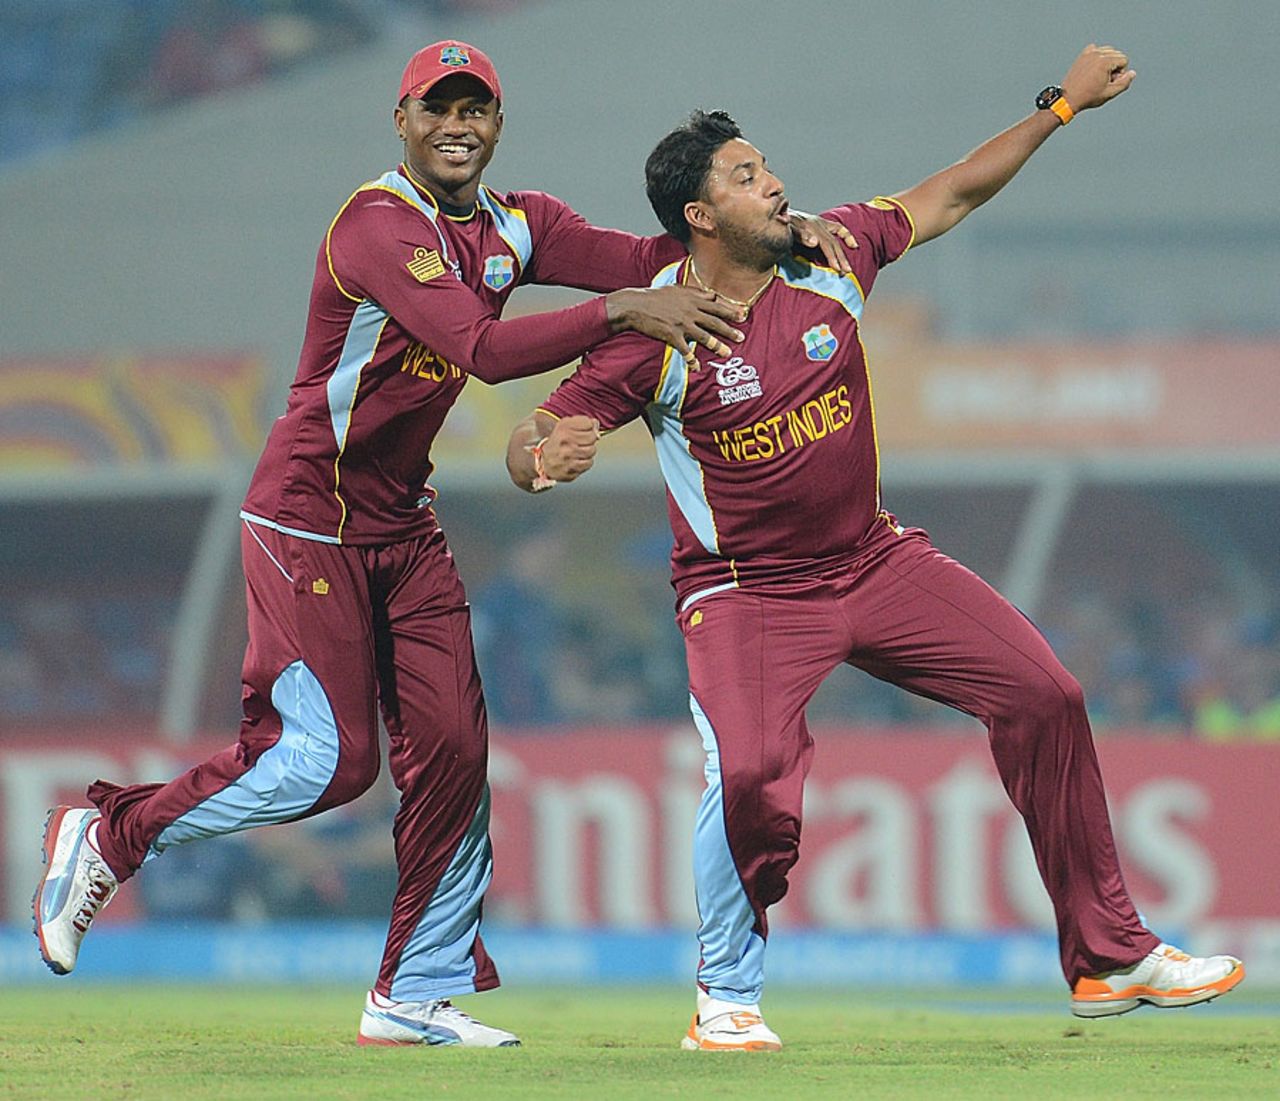 Ravi Rampaul took two wickets in the first over, England v West Indies, World Twenty20 2012, Super Eights, Pallekele, September 27, 2012